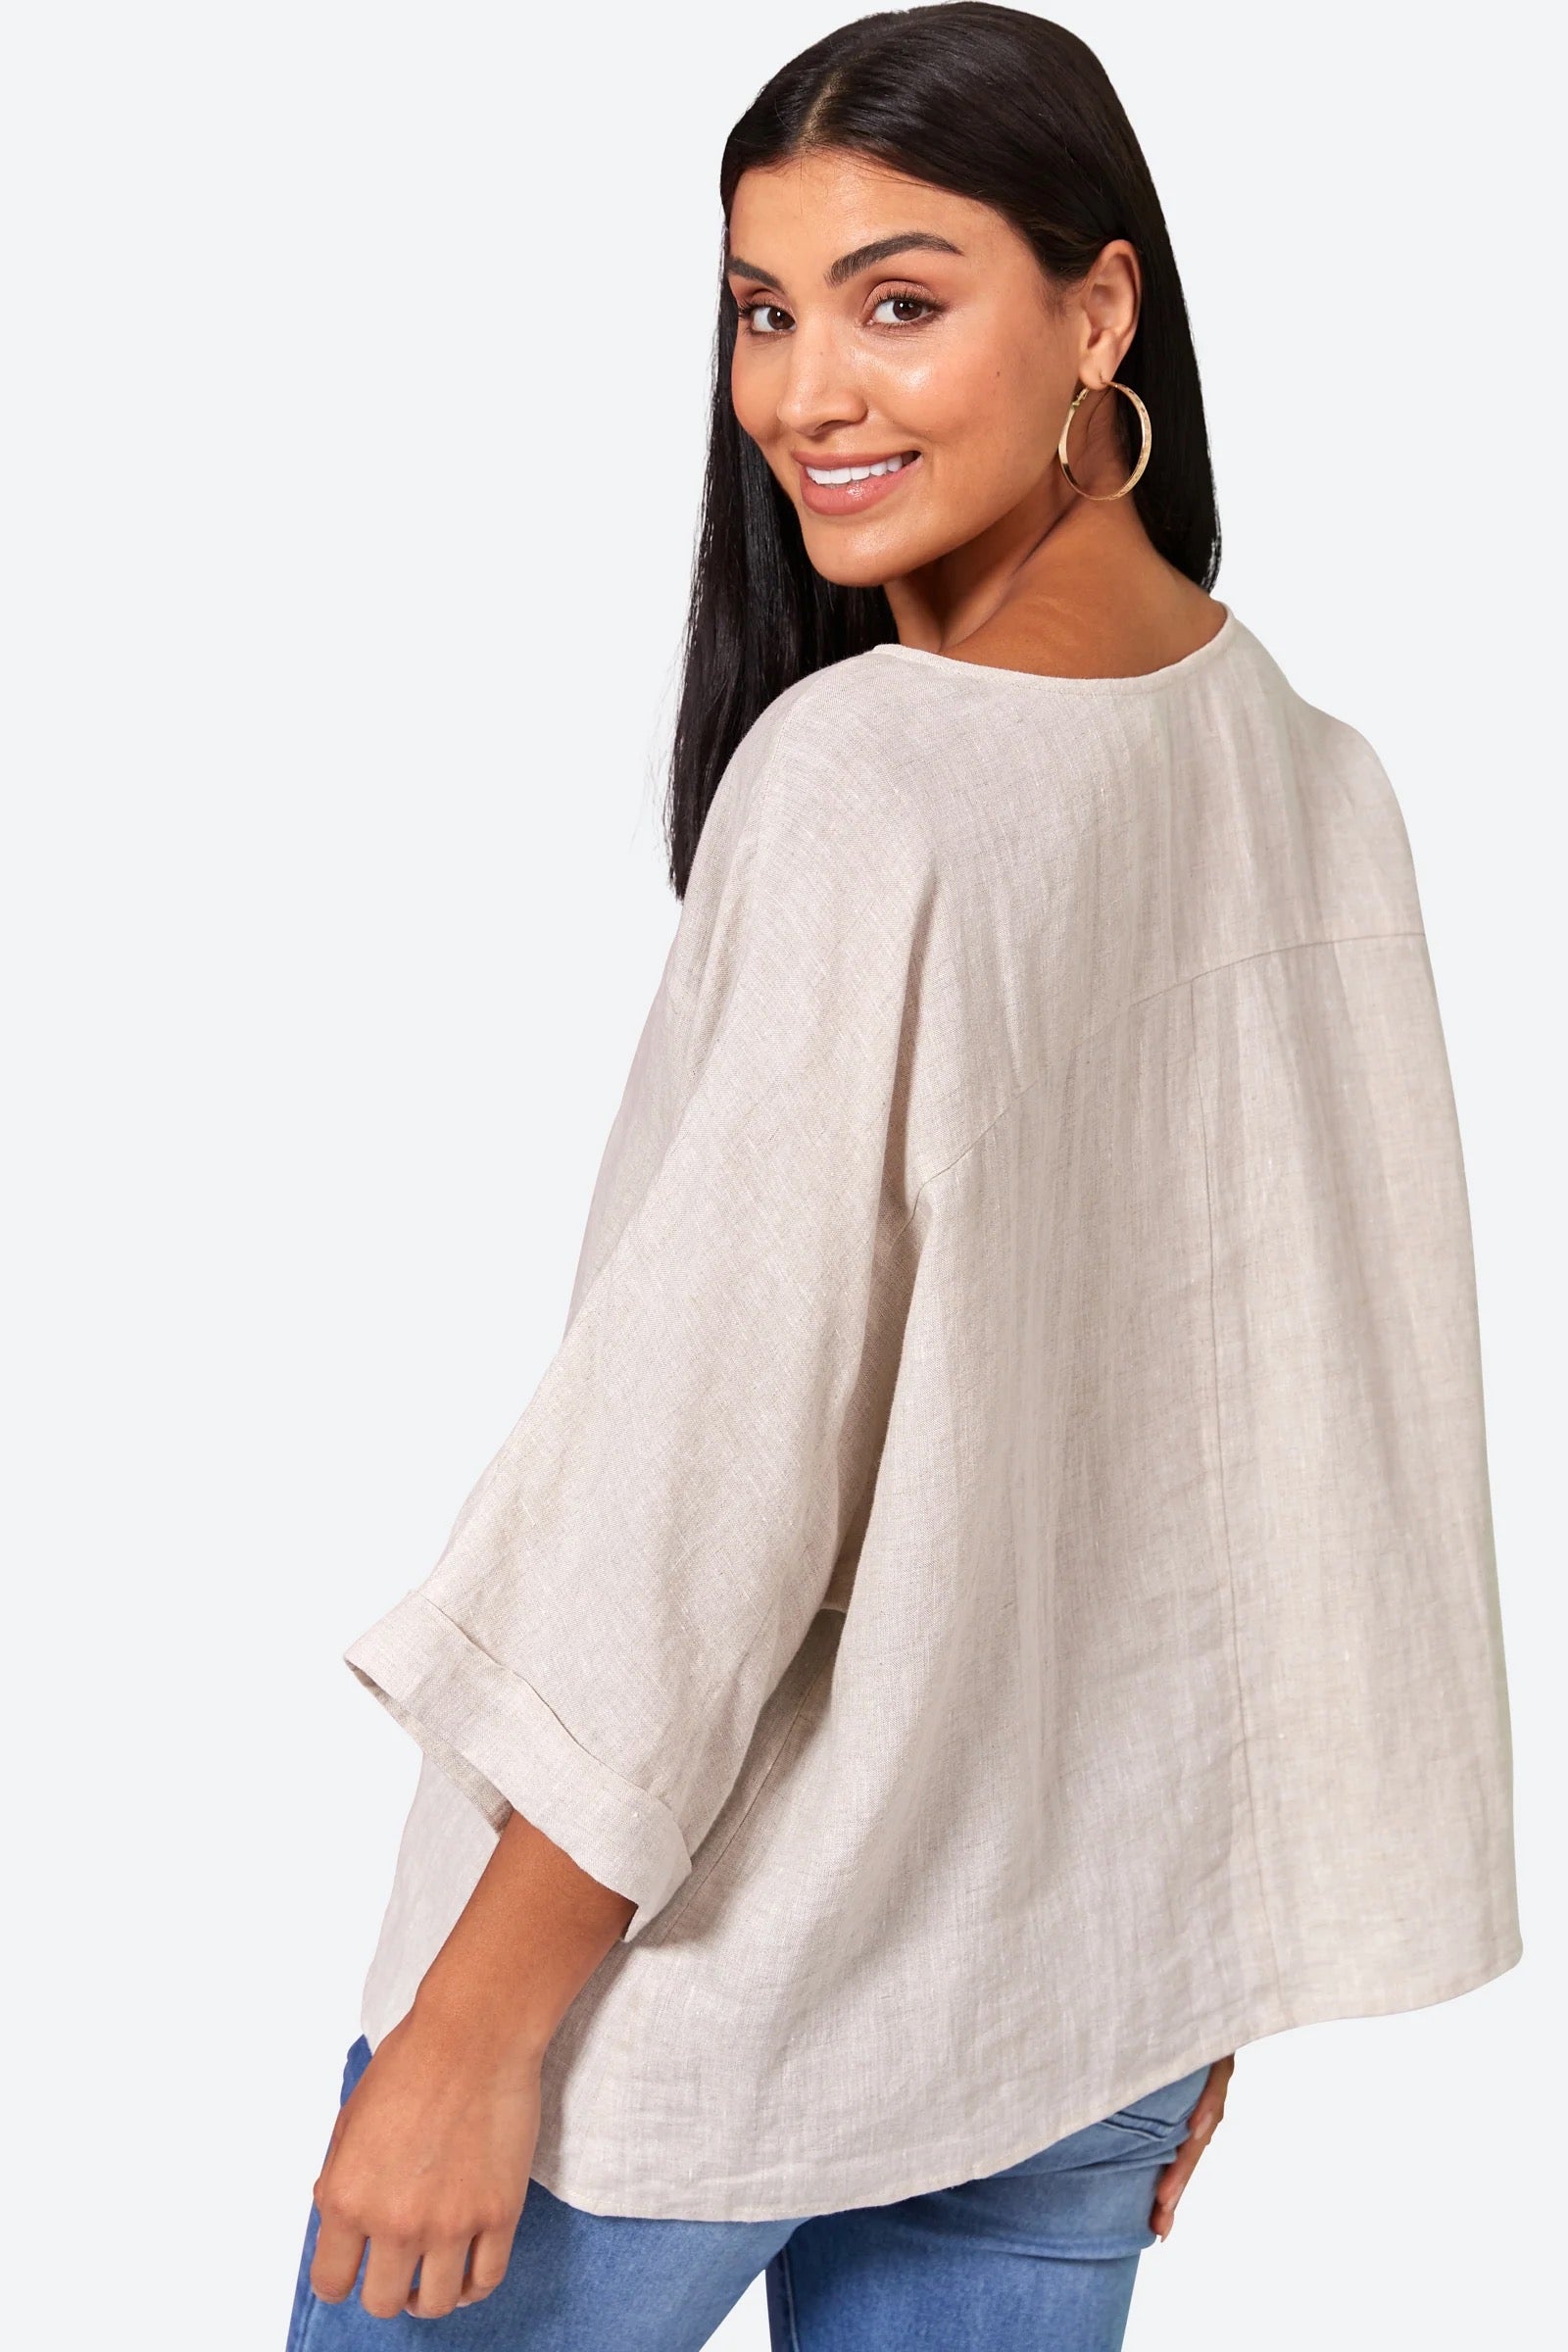 Studio Relaxed Top - EB & IVE Top One Size Tusk NZ LUMA